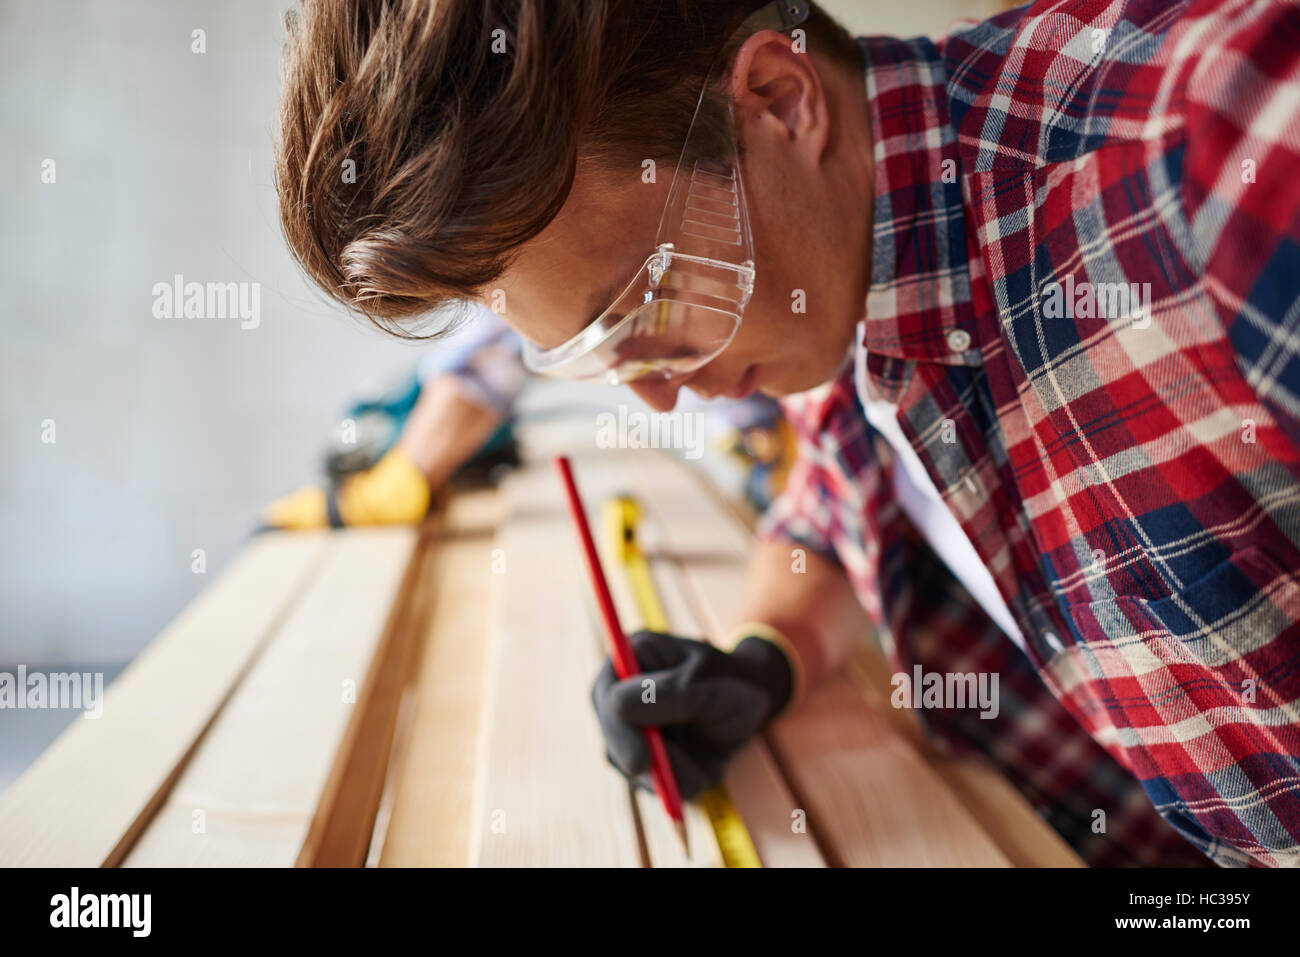 Another measurement done by building worker Stock Photo